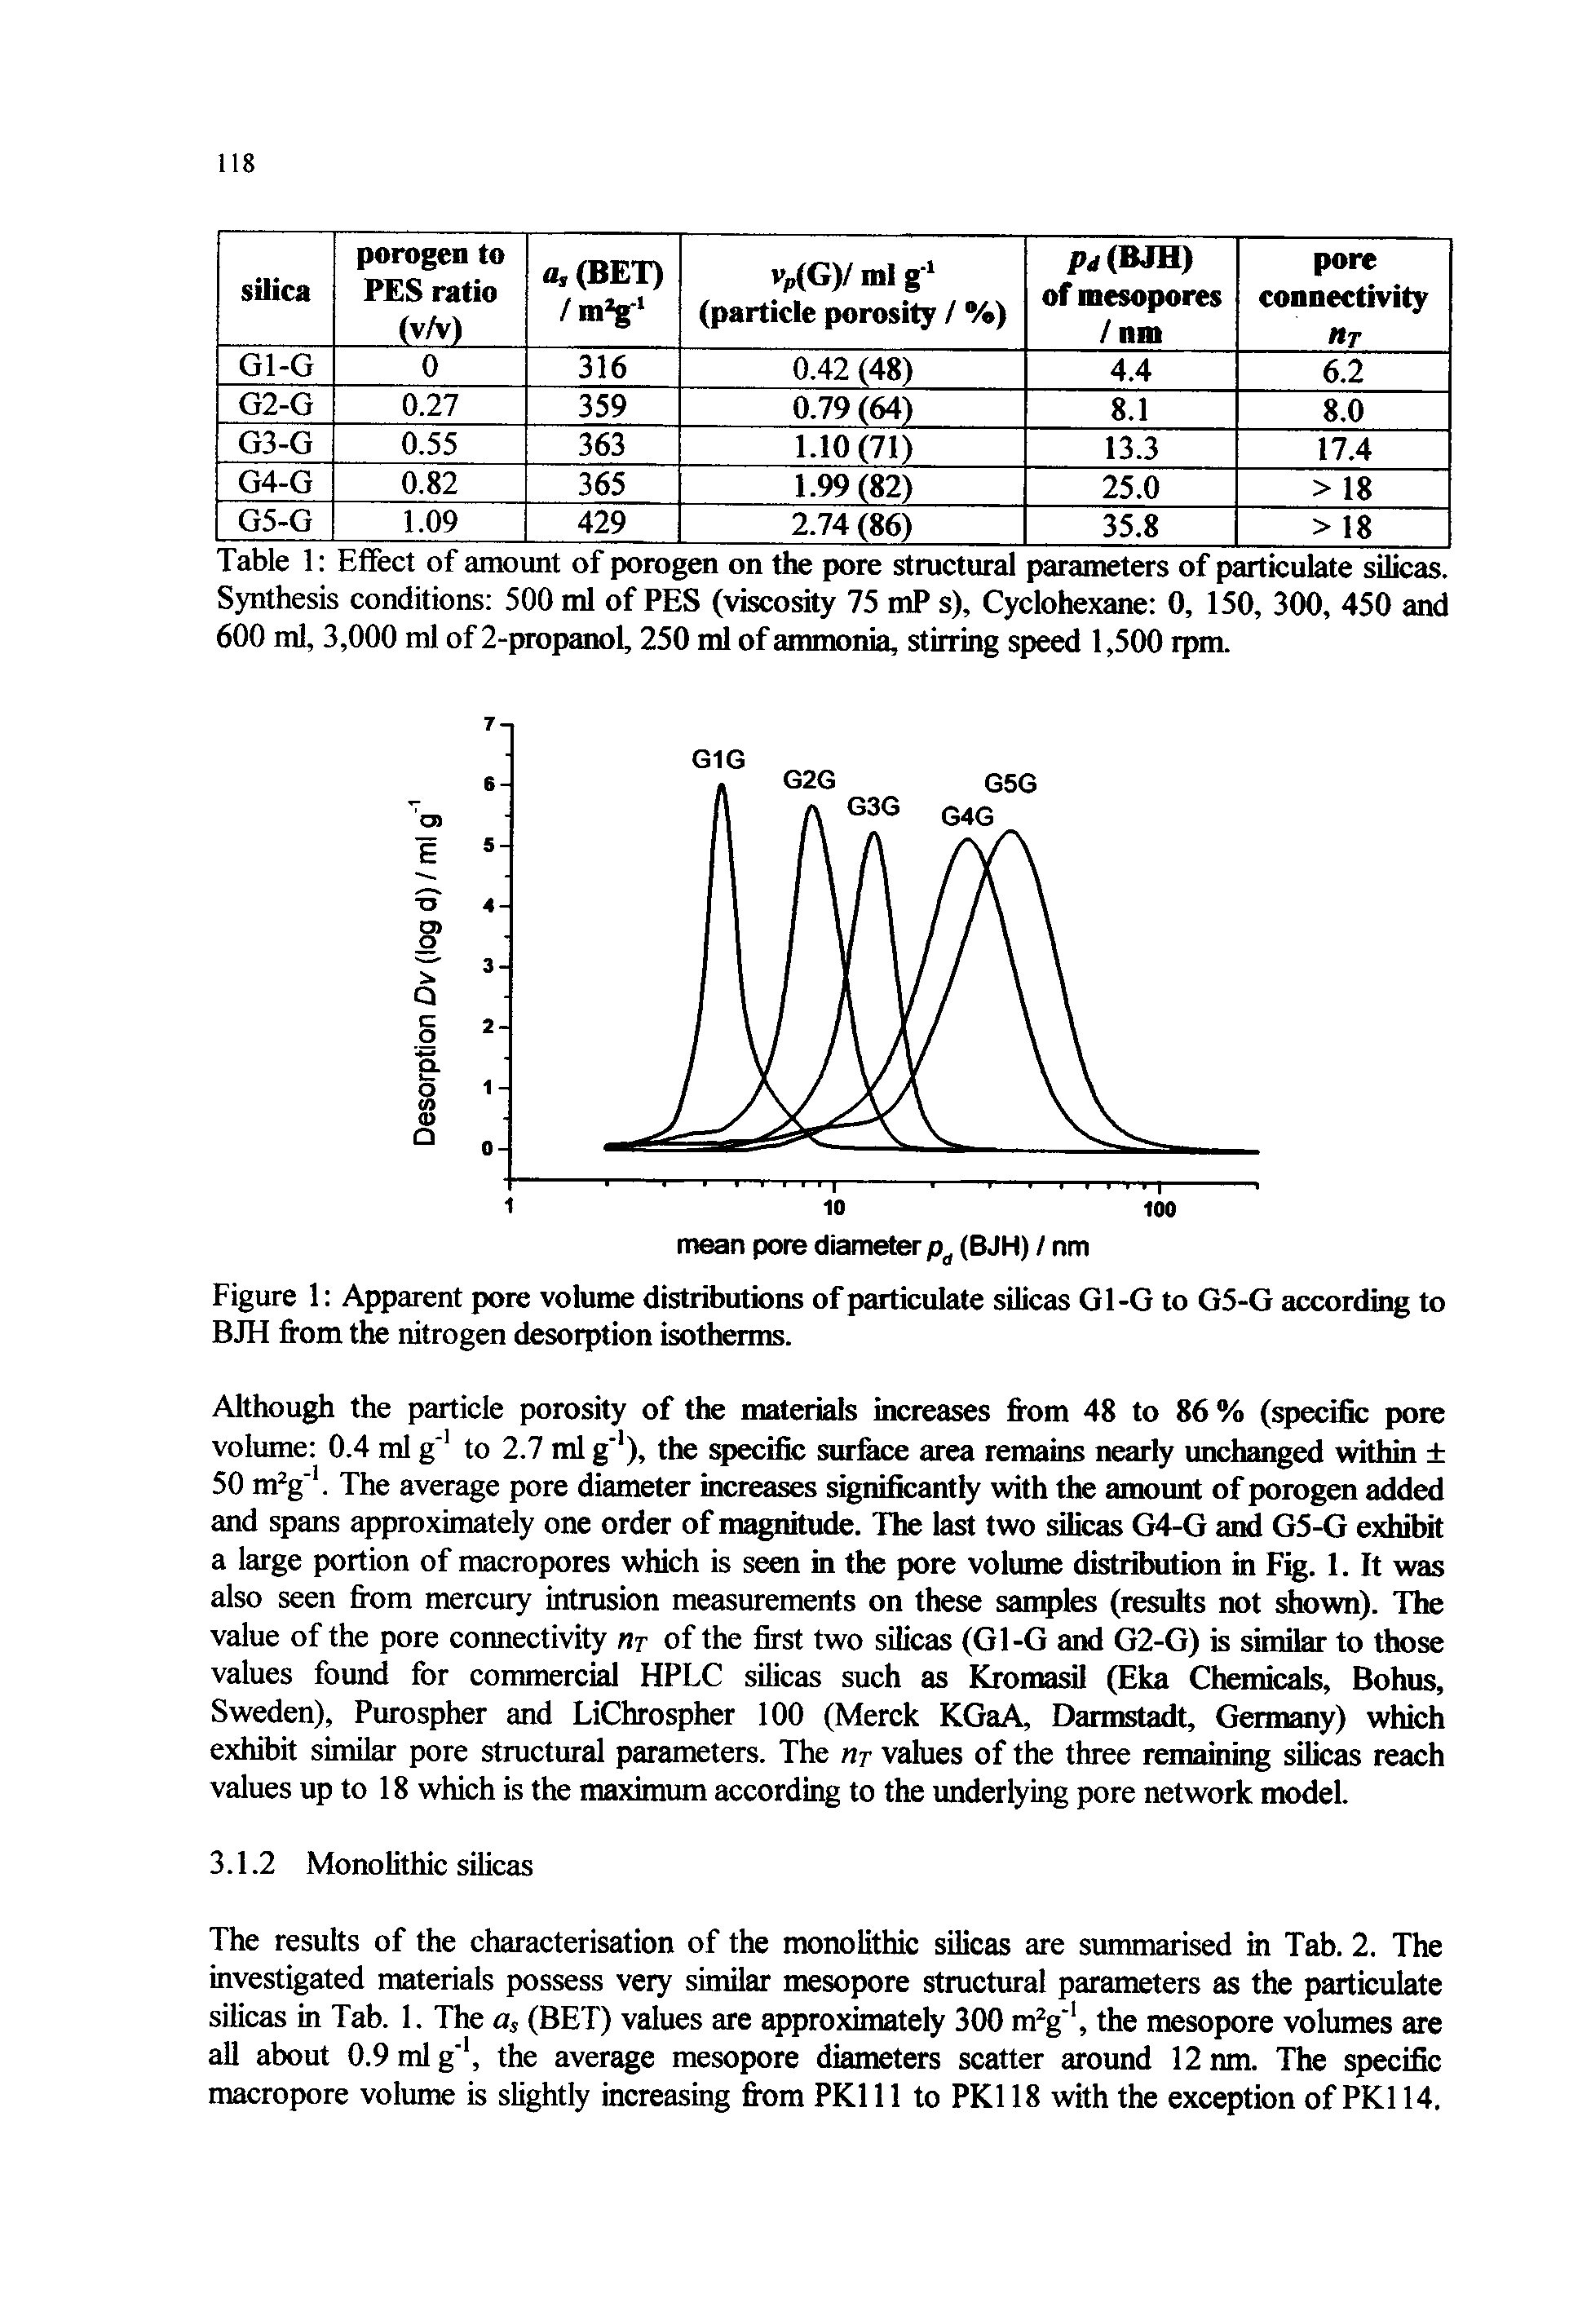 Figure 1 Apparent pore volume distributions of particulate silicas Gl-G to G5-G according to BJH from the nitrogen desorption isotherms.